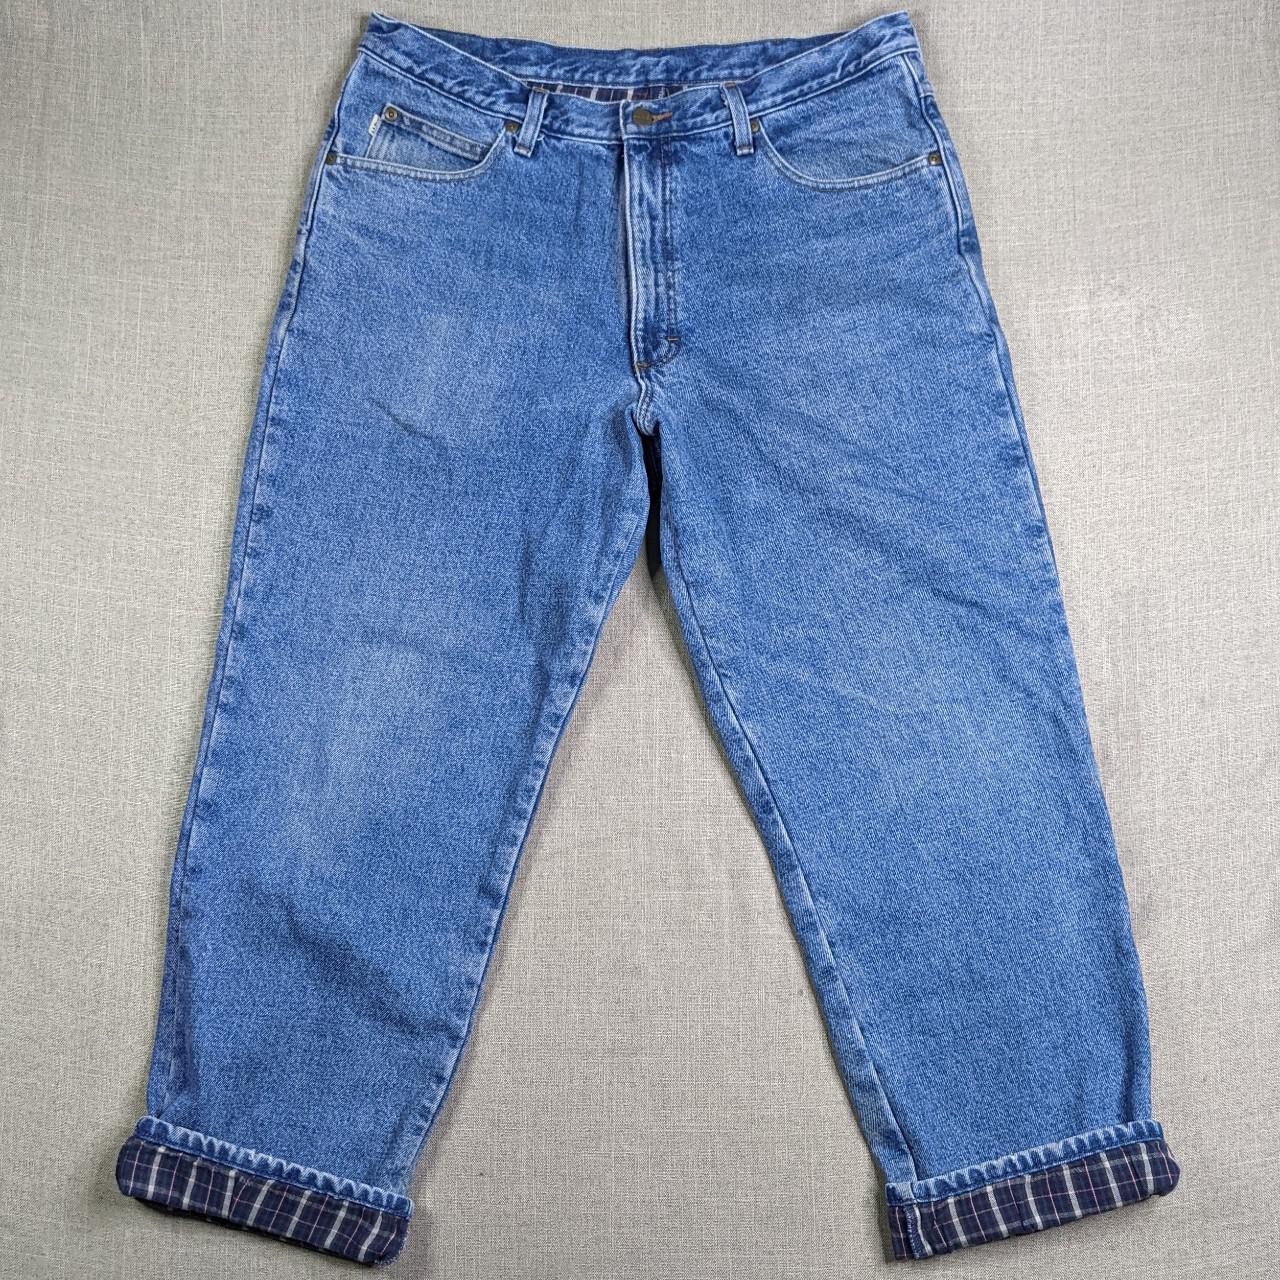 Product Image 3 - Vintage flannel lined jeans by